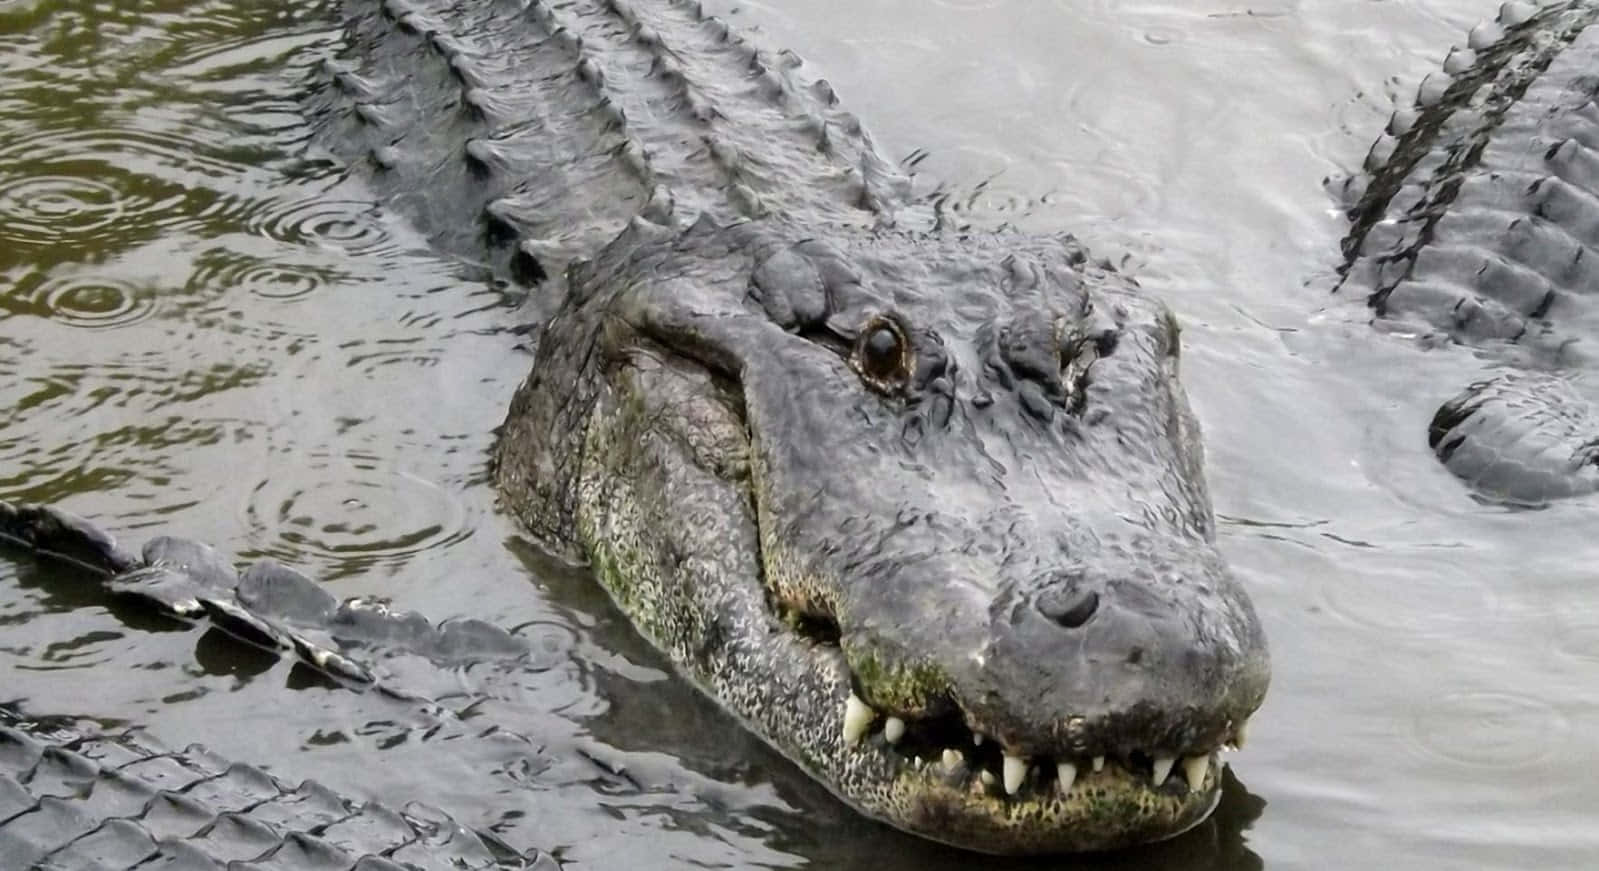 Close-up of an Alligator in the wild